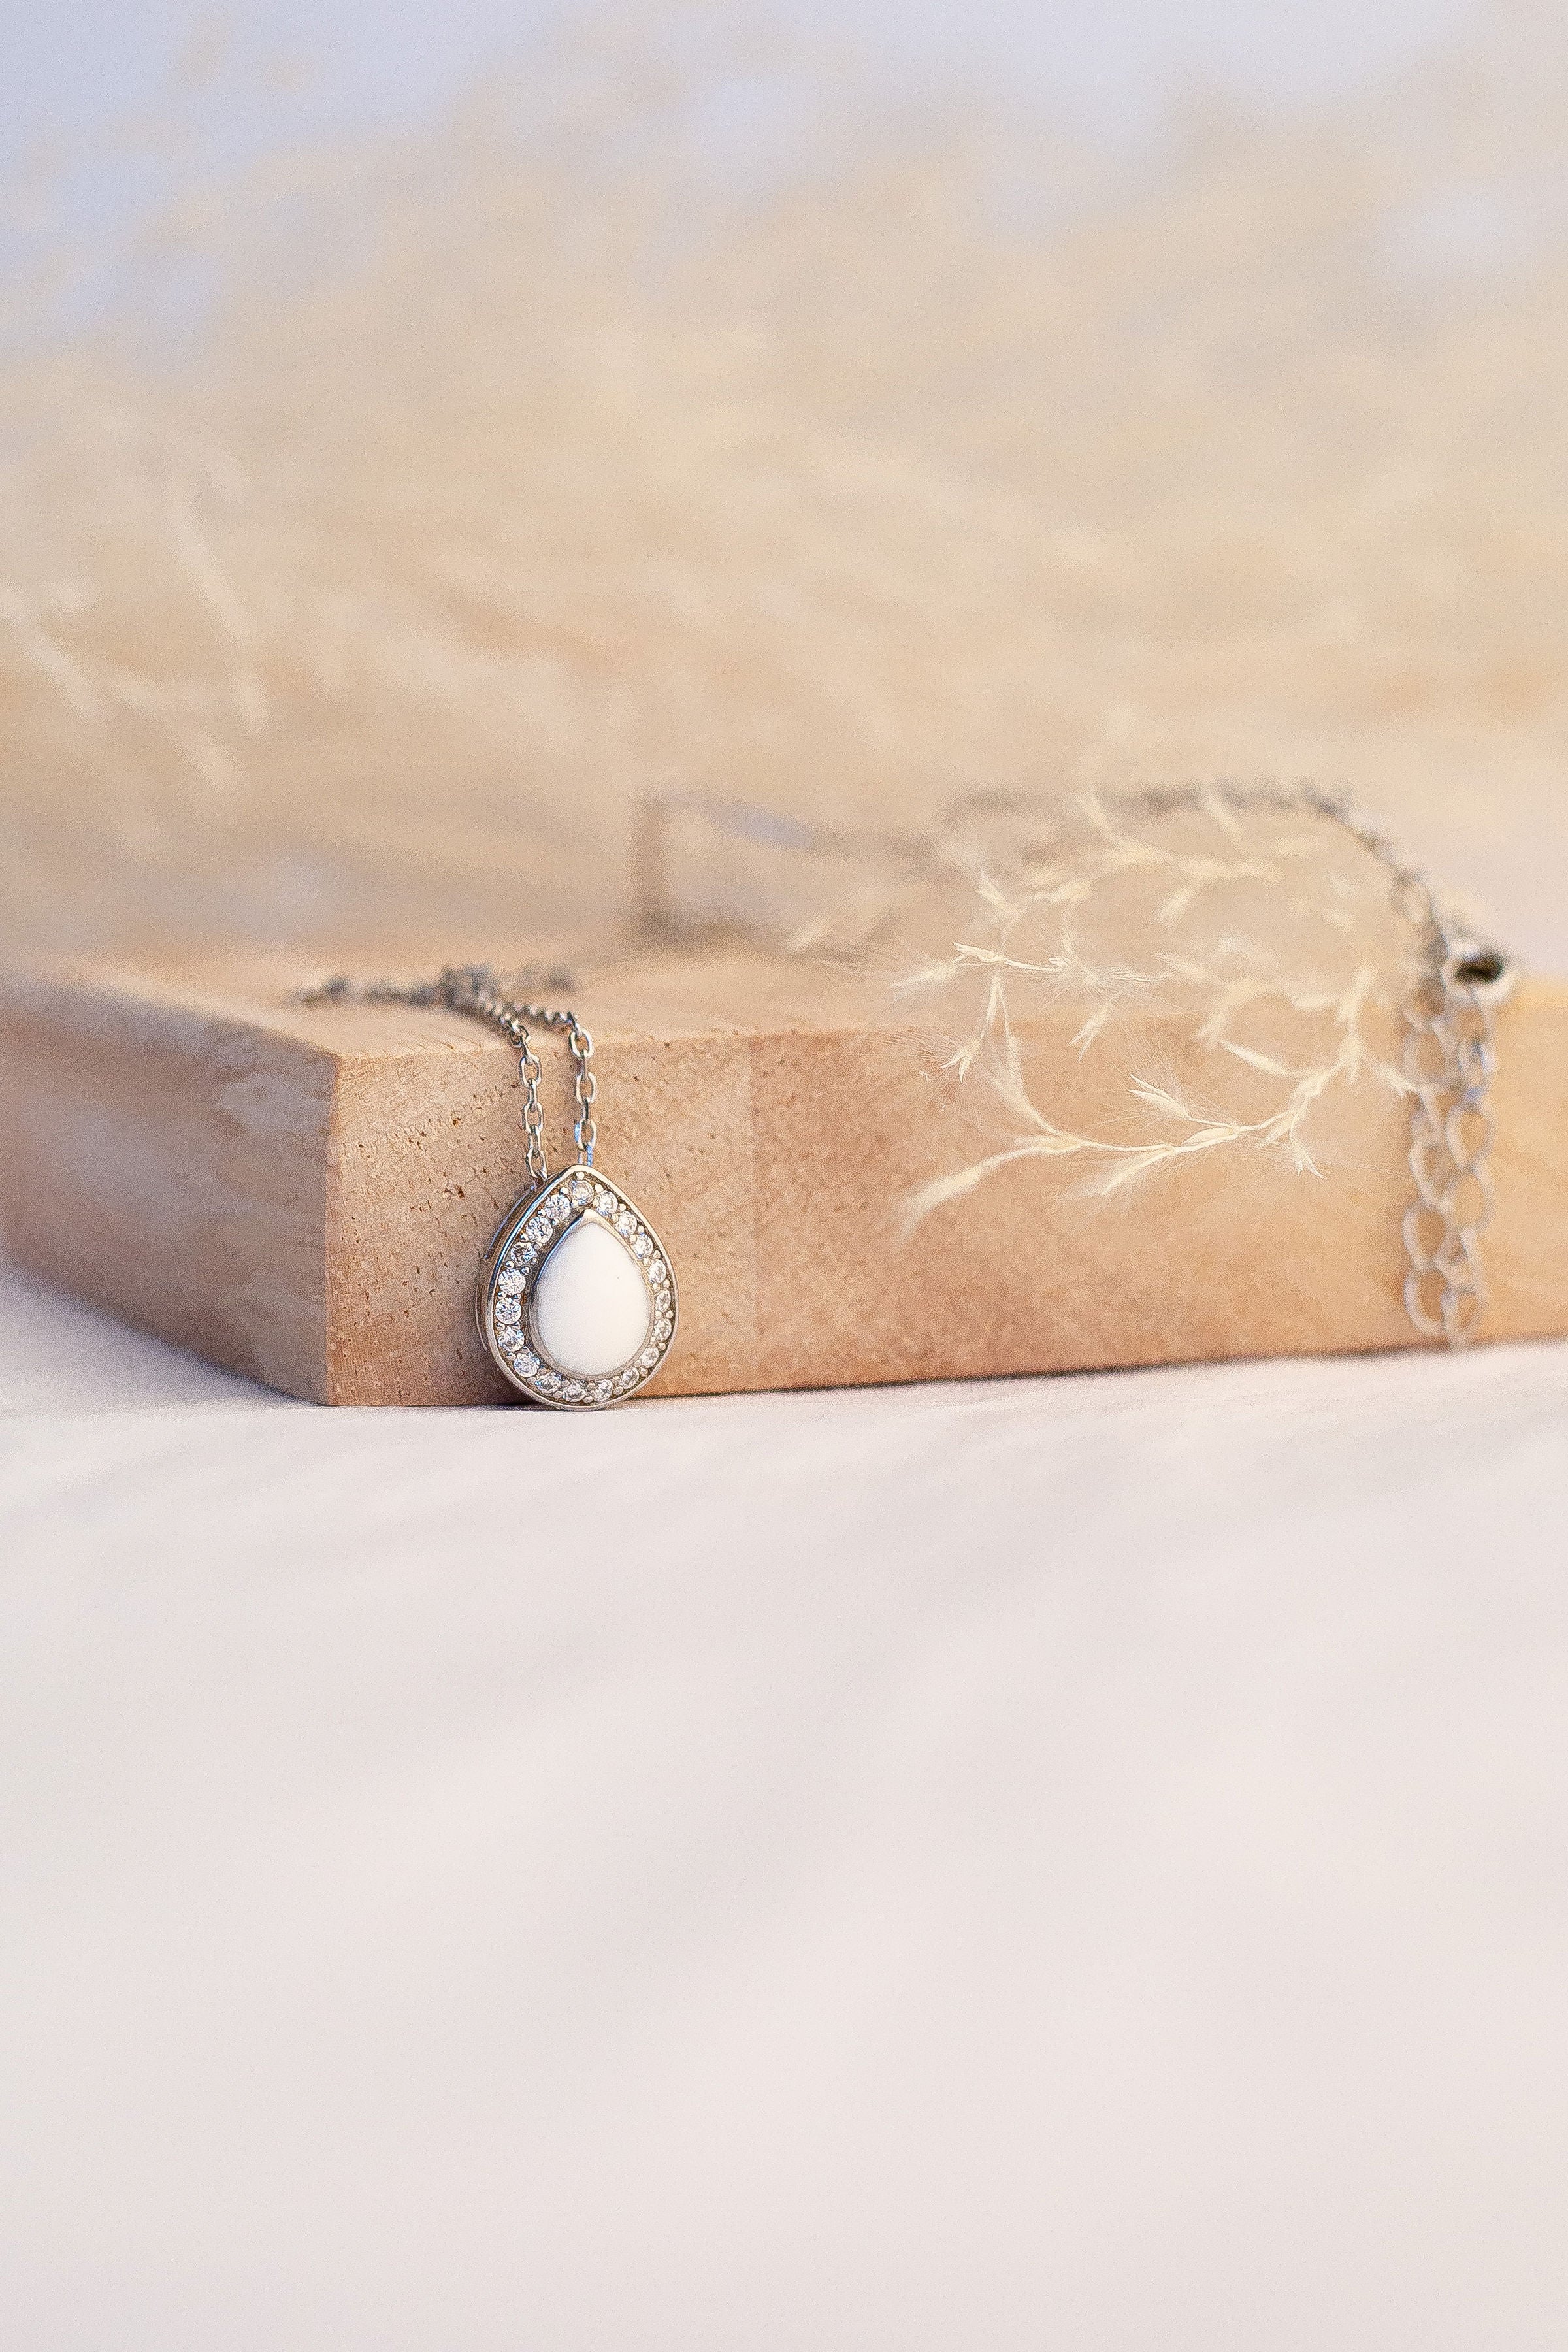 Halo Necklace - White Gold